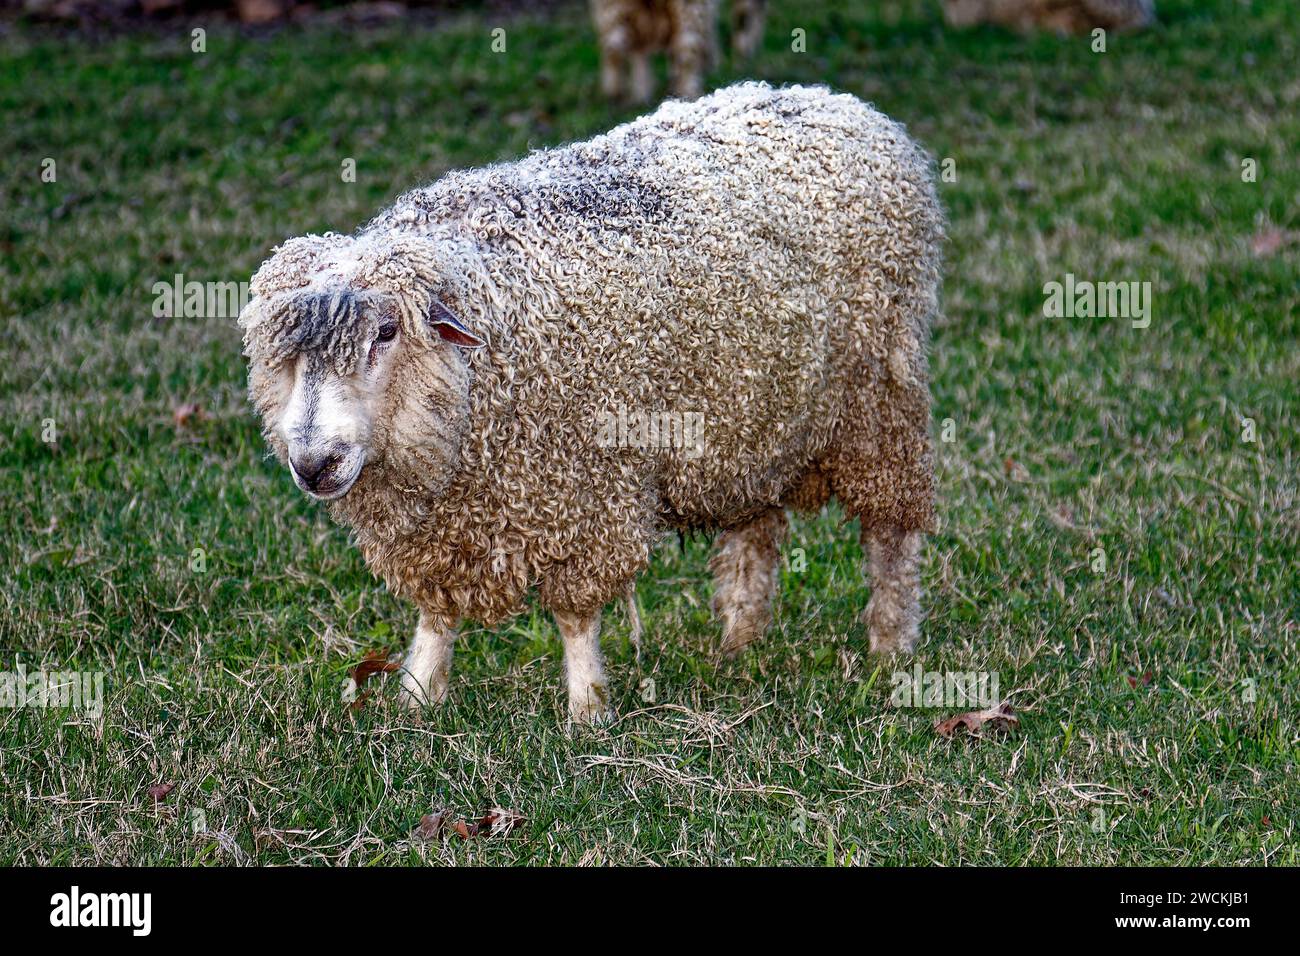 sheep portrait, wooly, standing in grass, full body, cute,  farm animal, mammal, domestic, ruminant, crimped hair, close-up, Virginia Stock Photo